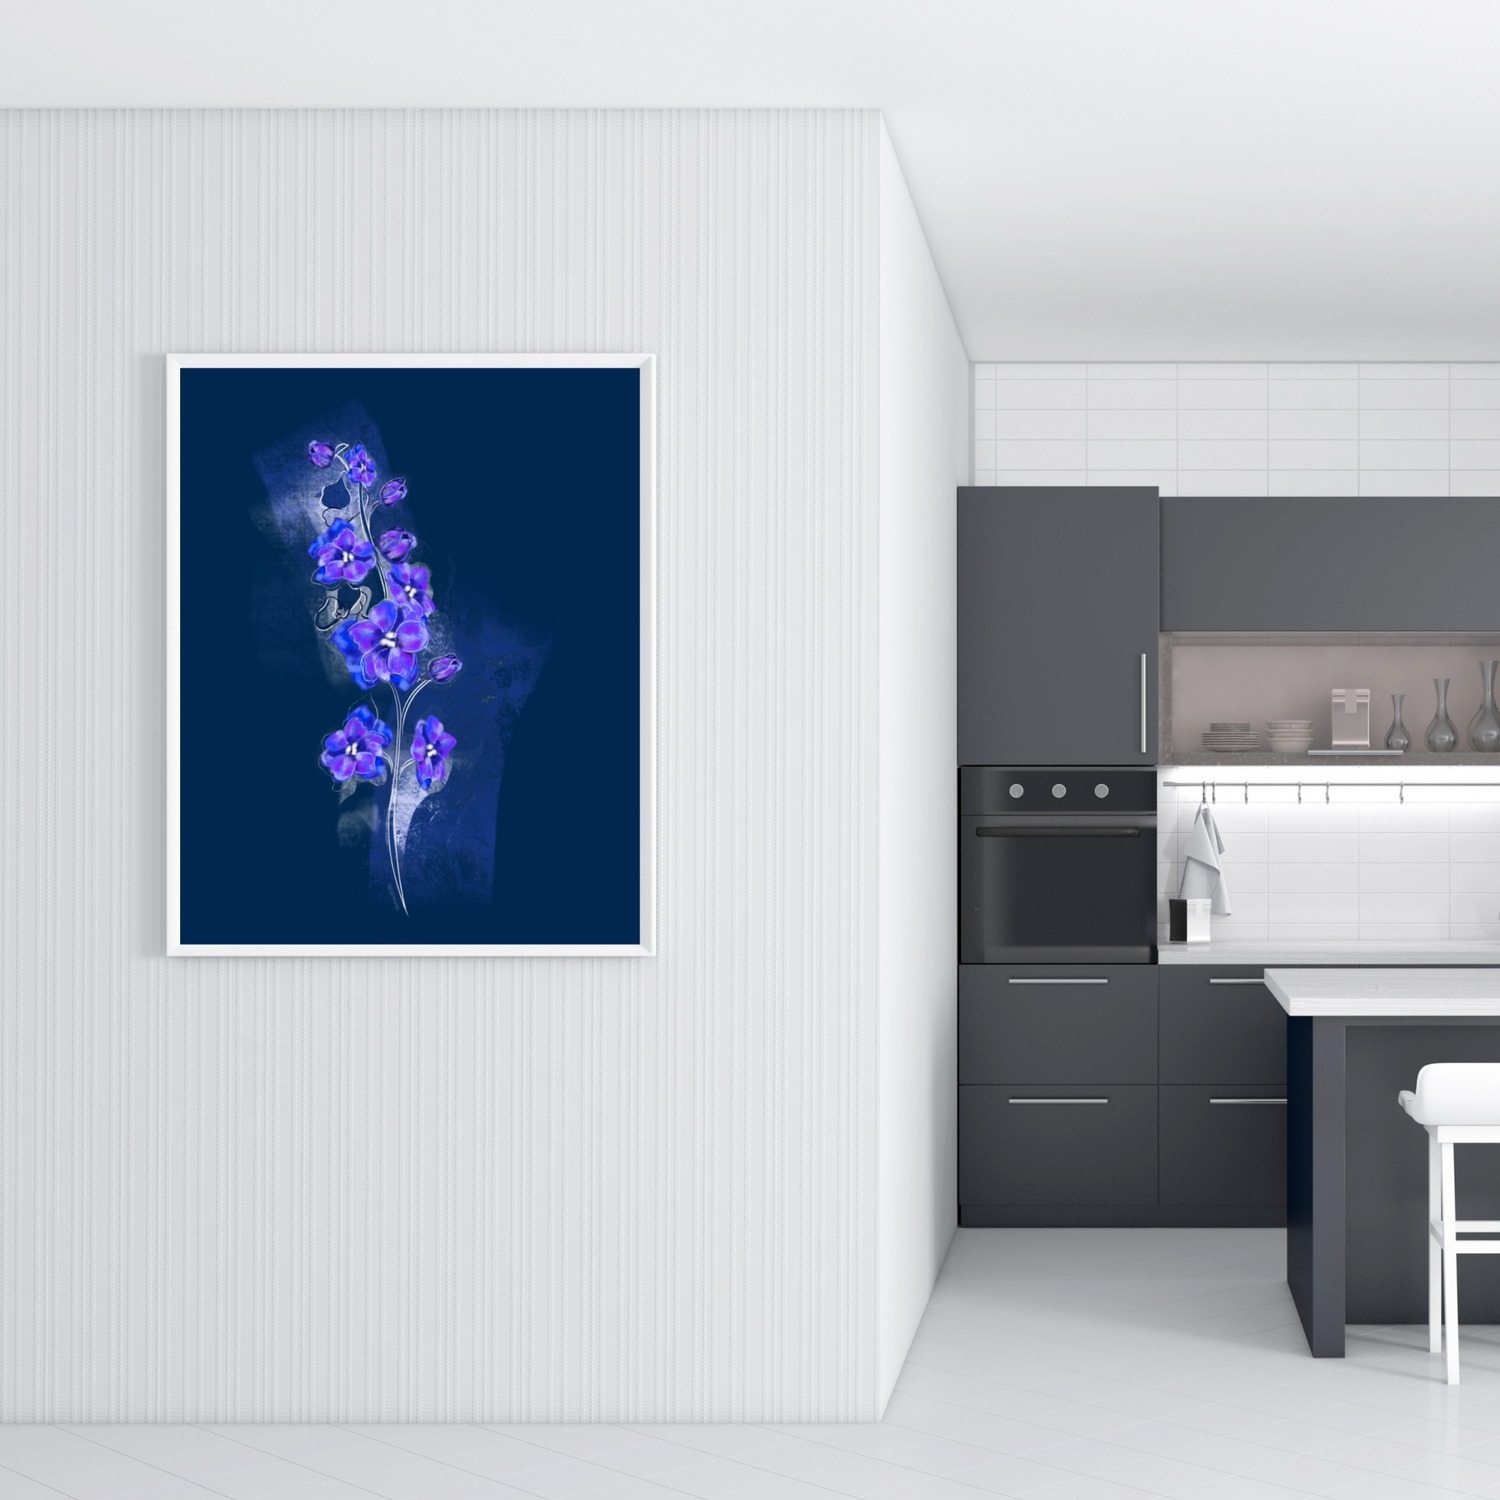 An example of the Larkspur painting by ArisaTeam in a kitchen